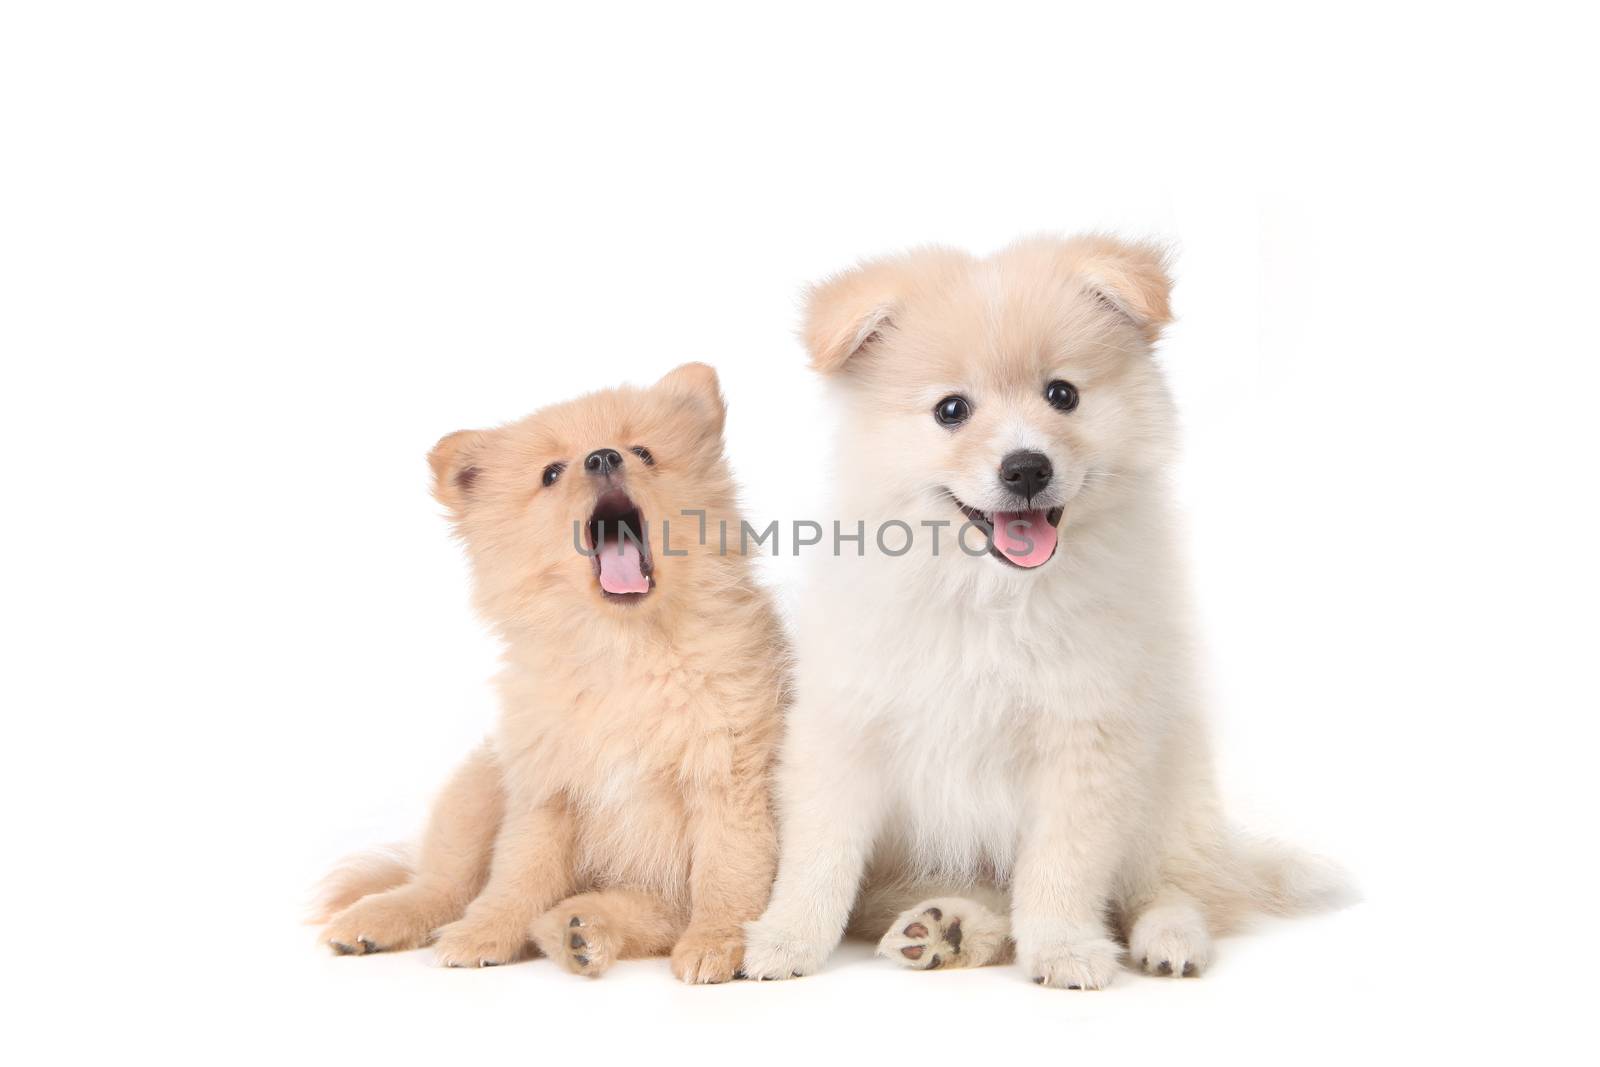 Cute Pomeranian puppies sitting obediently on a white background